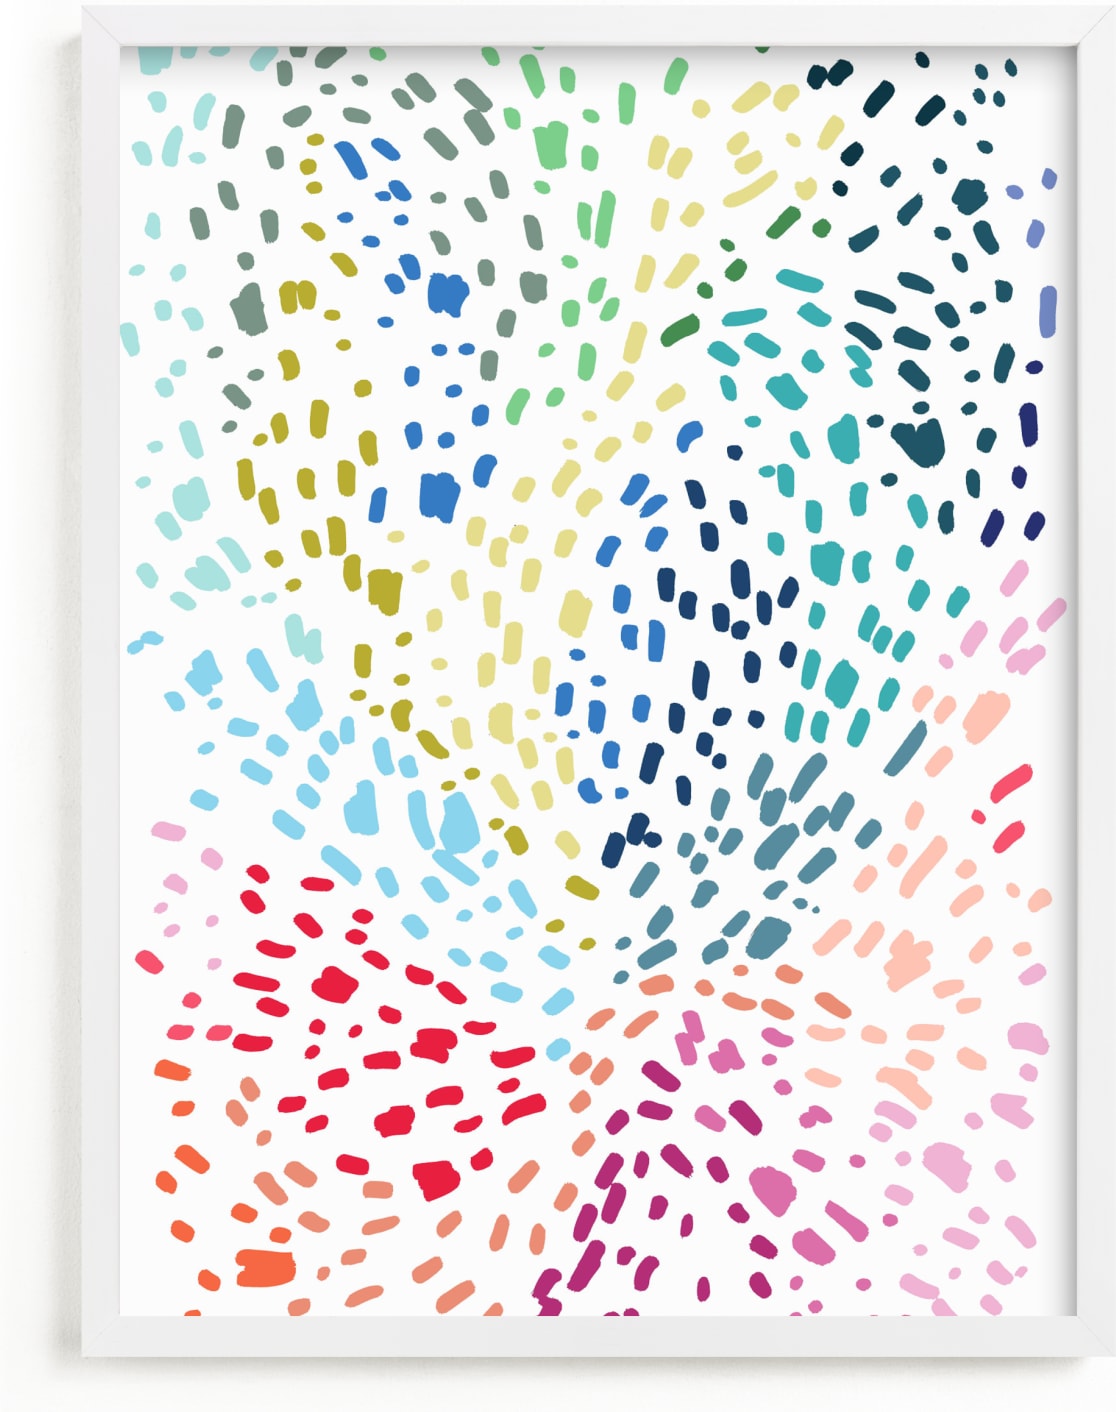 This is a colorful kids wall art by Katie Craig called Spots and Dots.